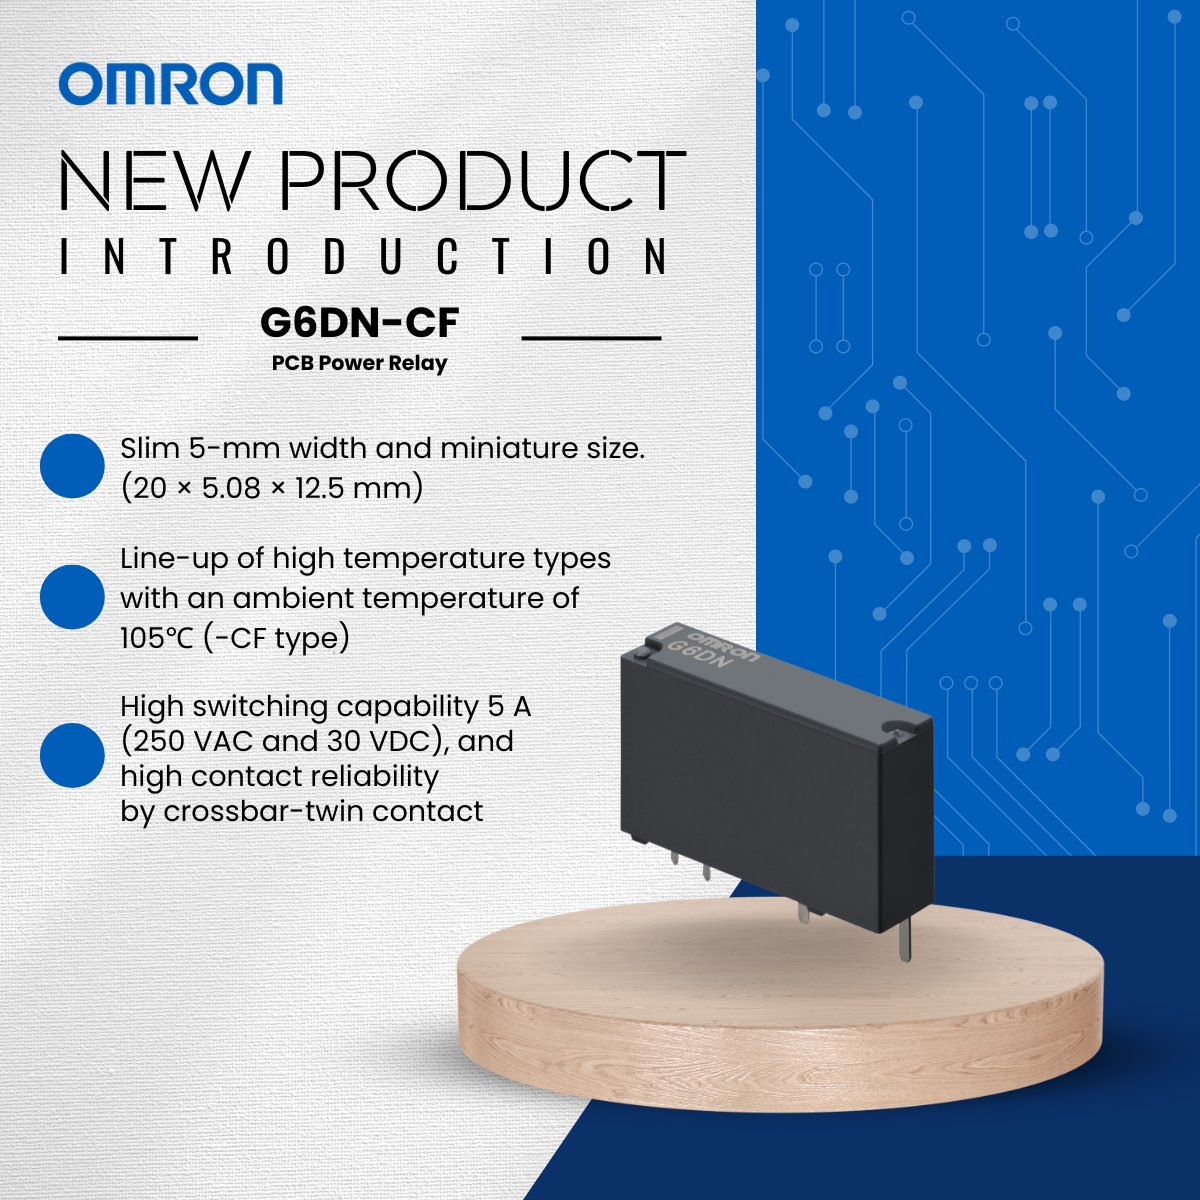 🚨 New Product Alert 🚨

Introducing the latest in OMRON relays, the G6DN-CF PCB Power Relay. 

Target Applications Include:
• PLC
• General Purpose Inverter
• Temperature Controller
• Robot Controller

 #relays #highpowerrelays #factoryautomation